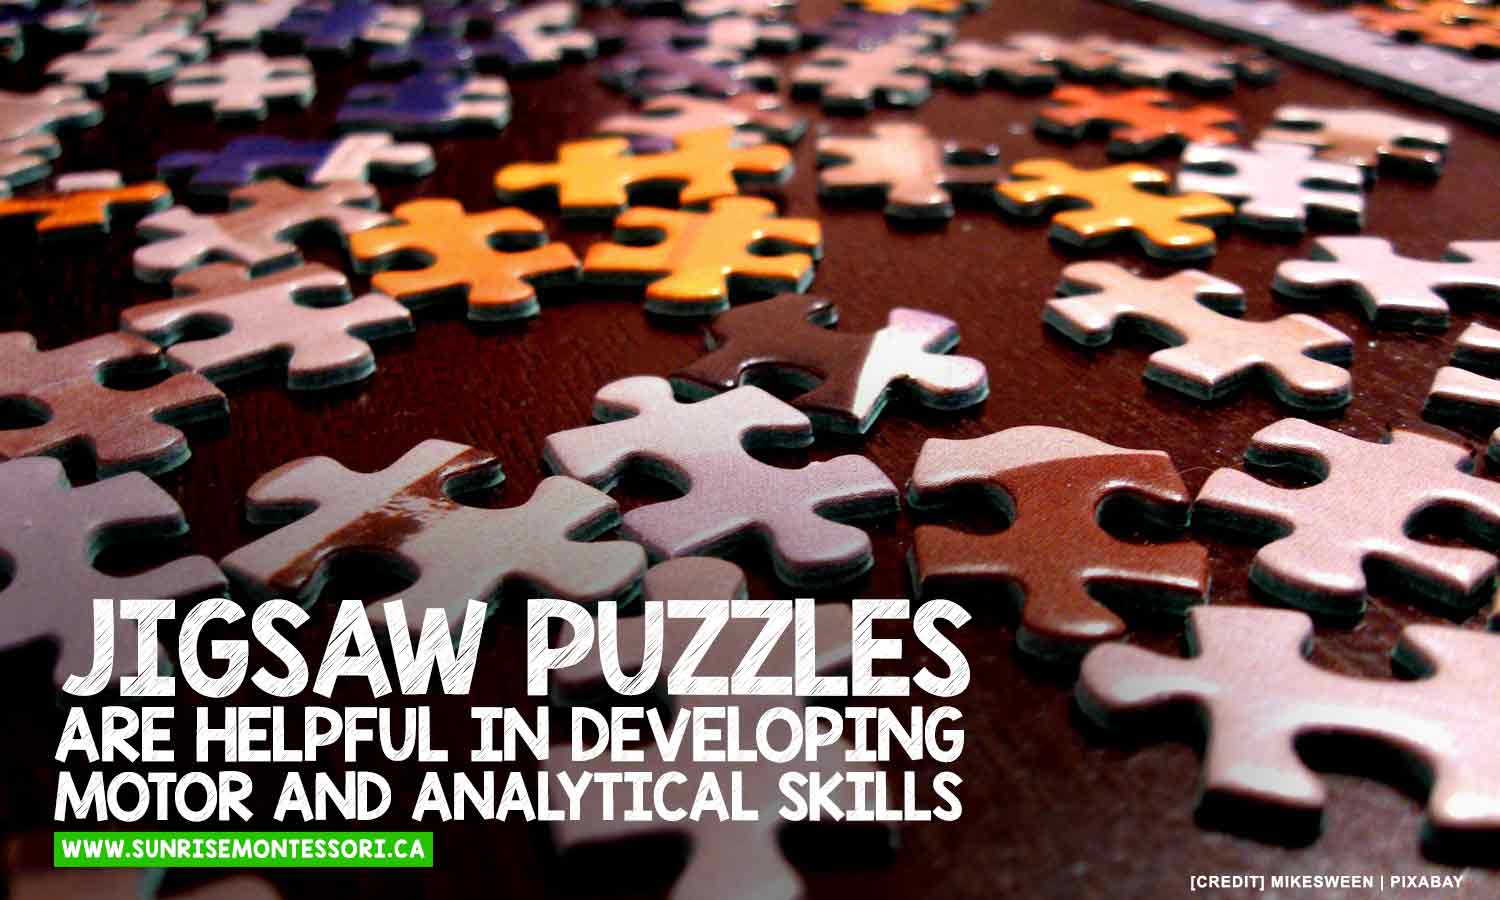 Jigsaw puzzles are helpful in developing motor and analytical skills